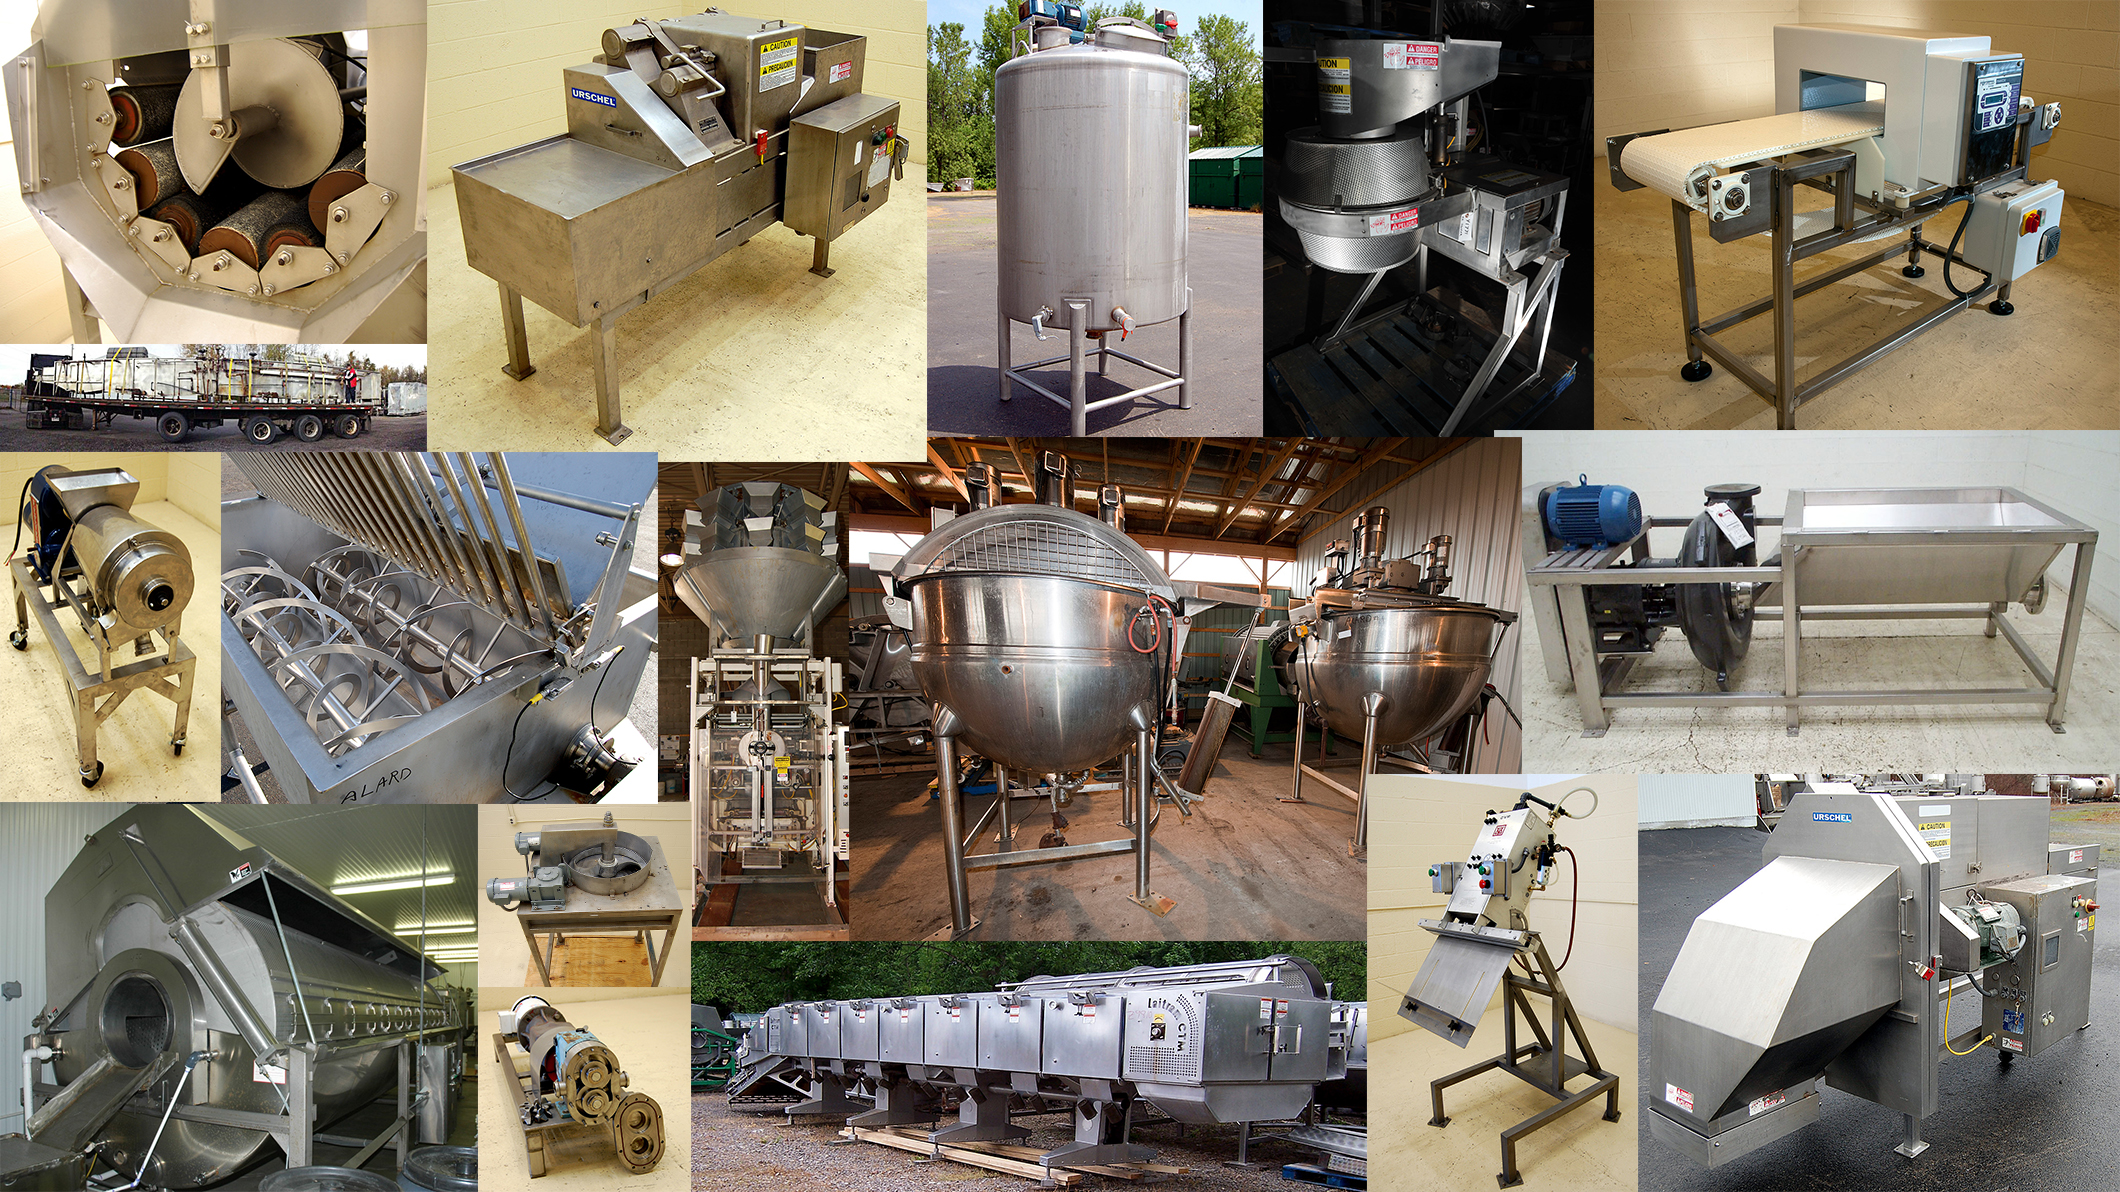 used, rebuilt, refurbished, reconditioned, and new food processing equipment, food packaging equipment